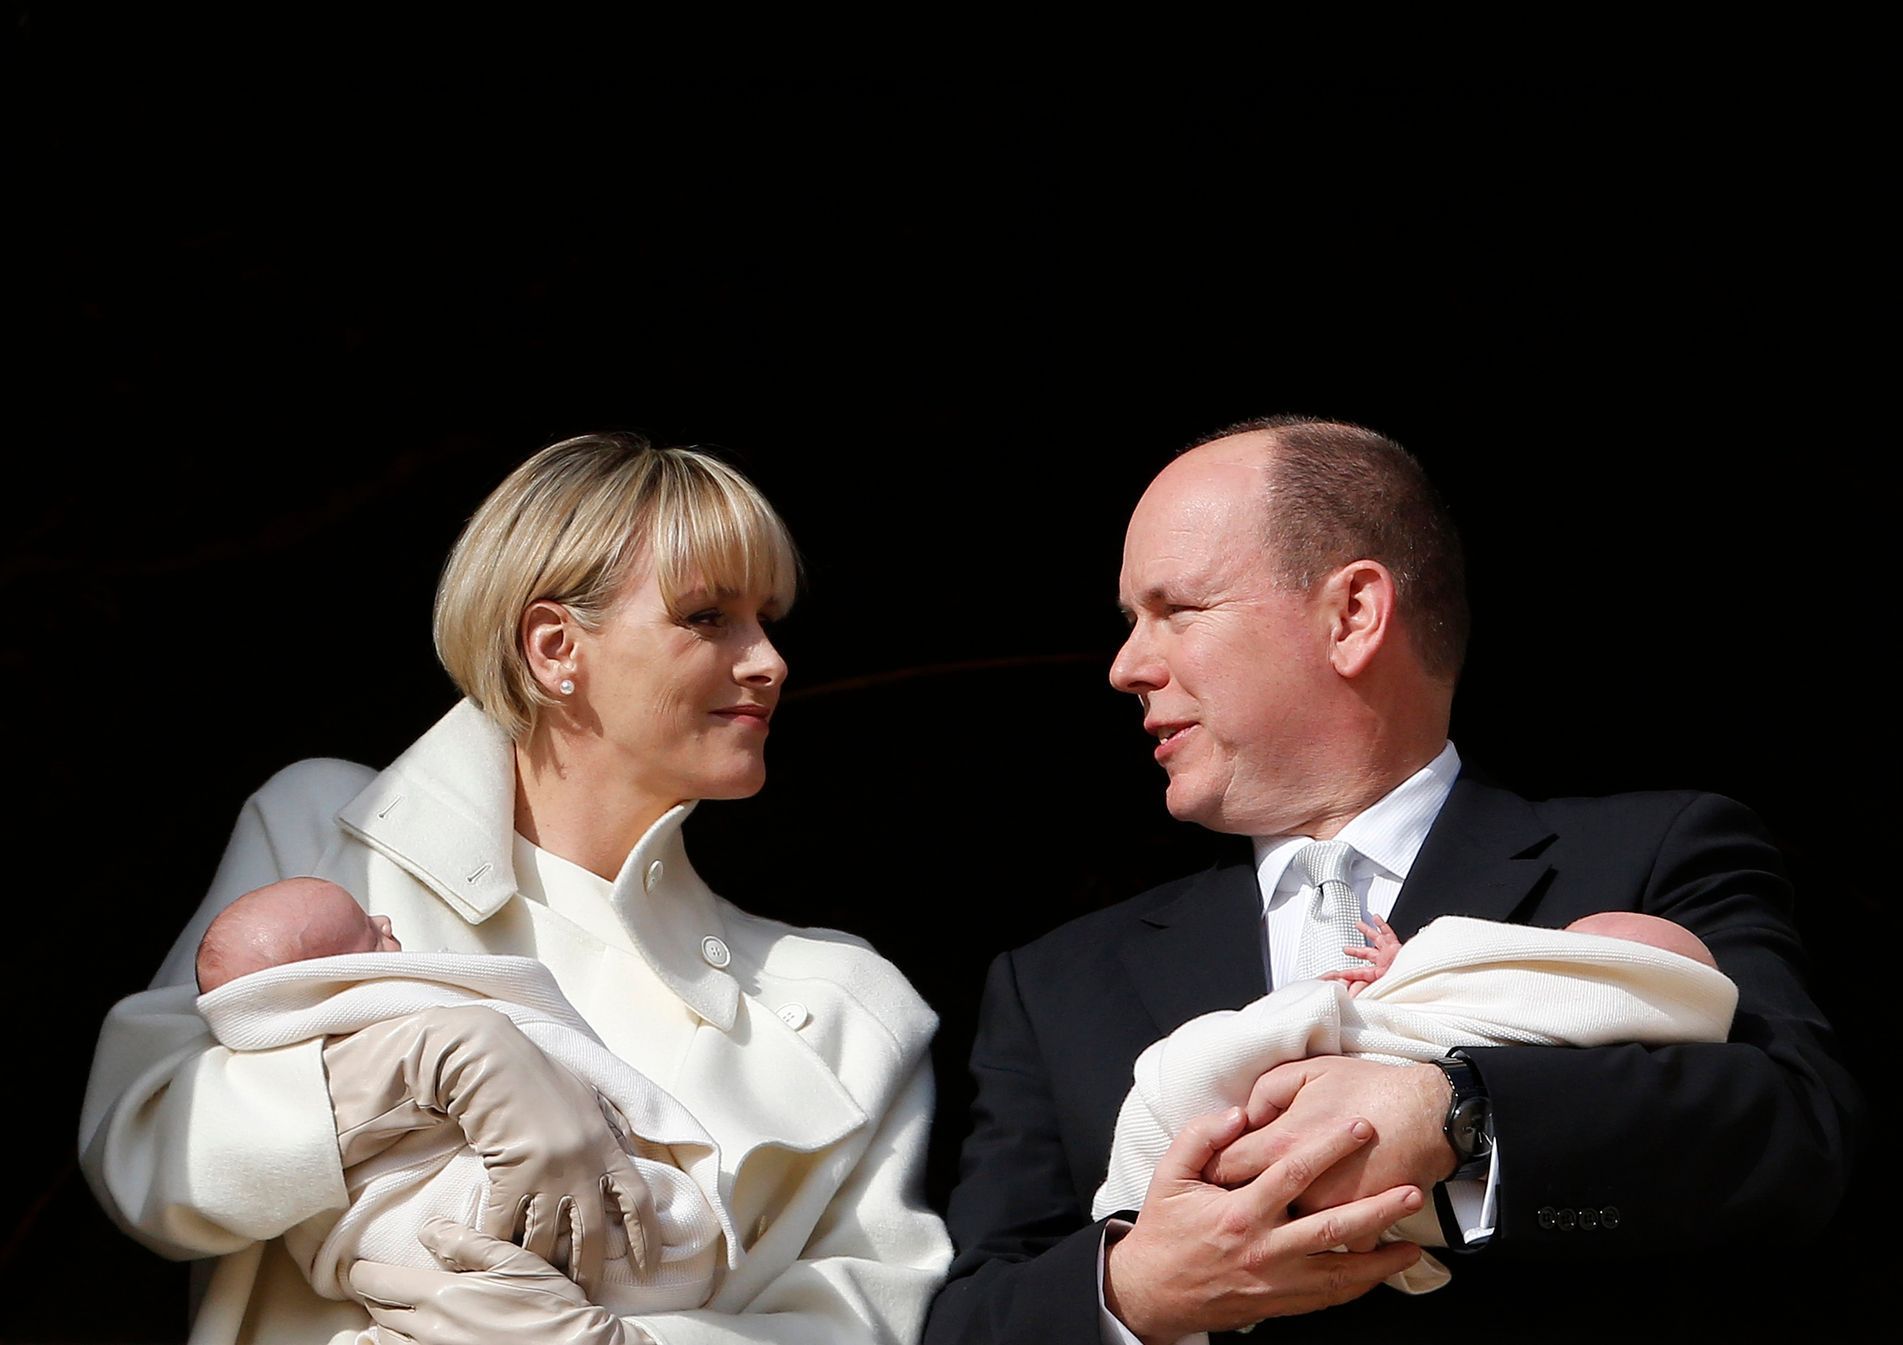 Prince Albert II of Monaco and his wife Princess Charlene hold their twins Prince Jacques and Princess Gabriella as they stand at the Palace Balcony during the official presentation of the Monaco's ne